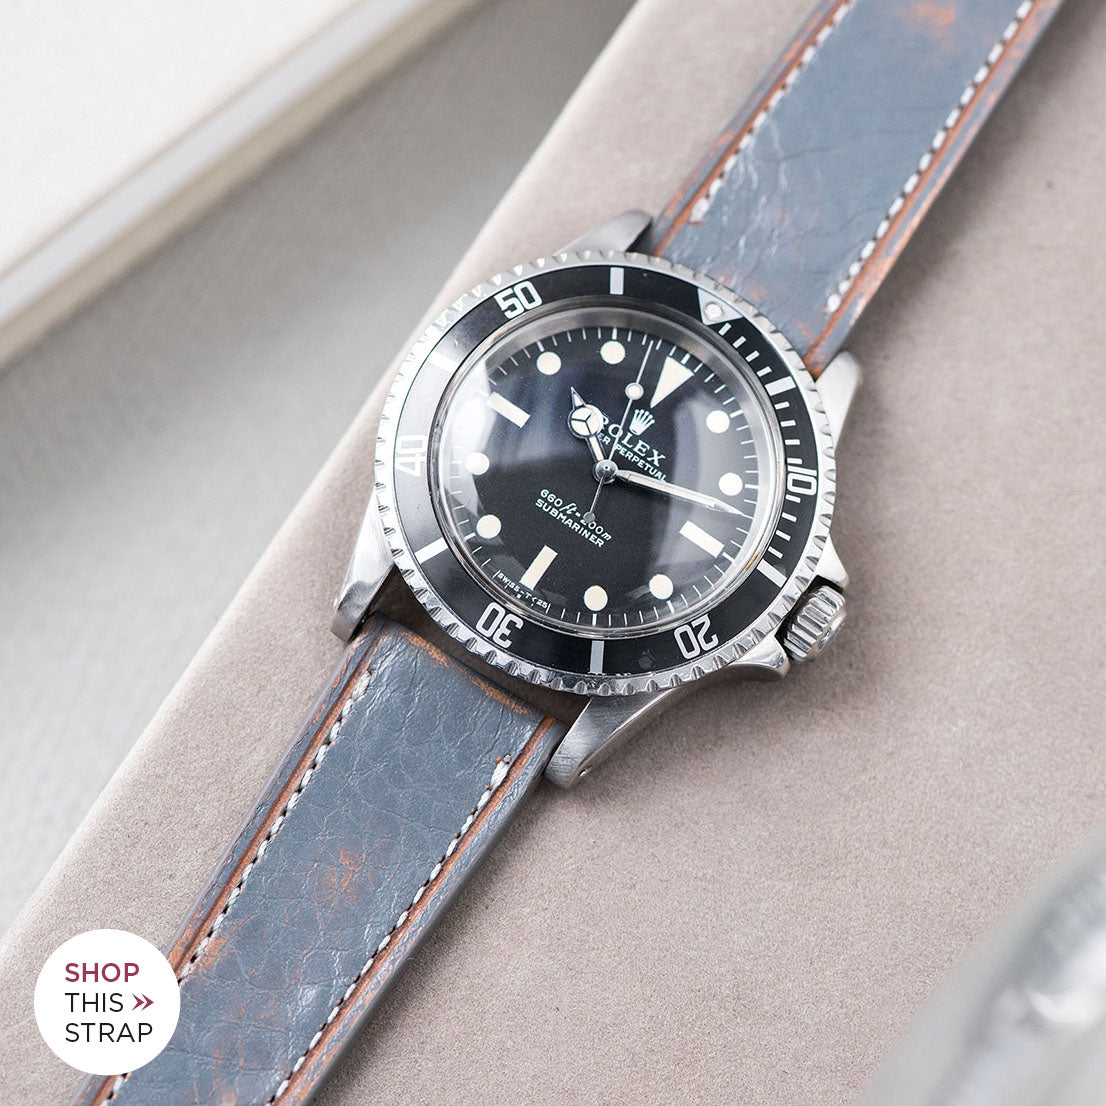 Bulang and Sons_Strap Guide_The Rolex 5513 Black Submariner_Denim Blue Retro Leather Watch Strap